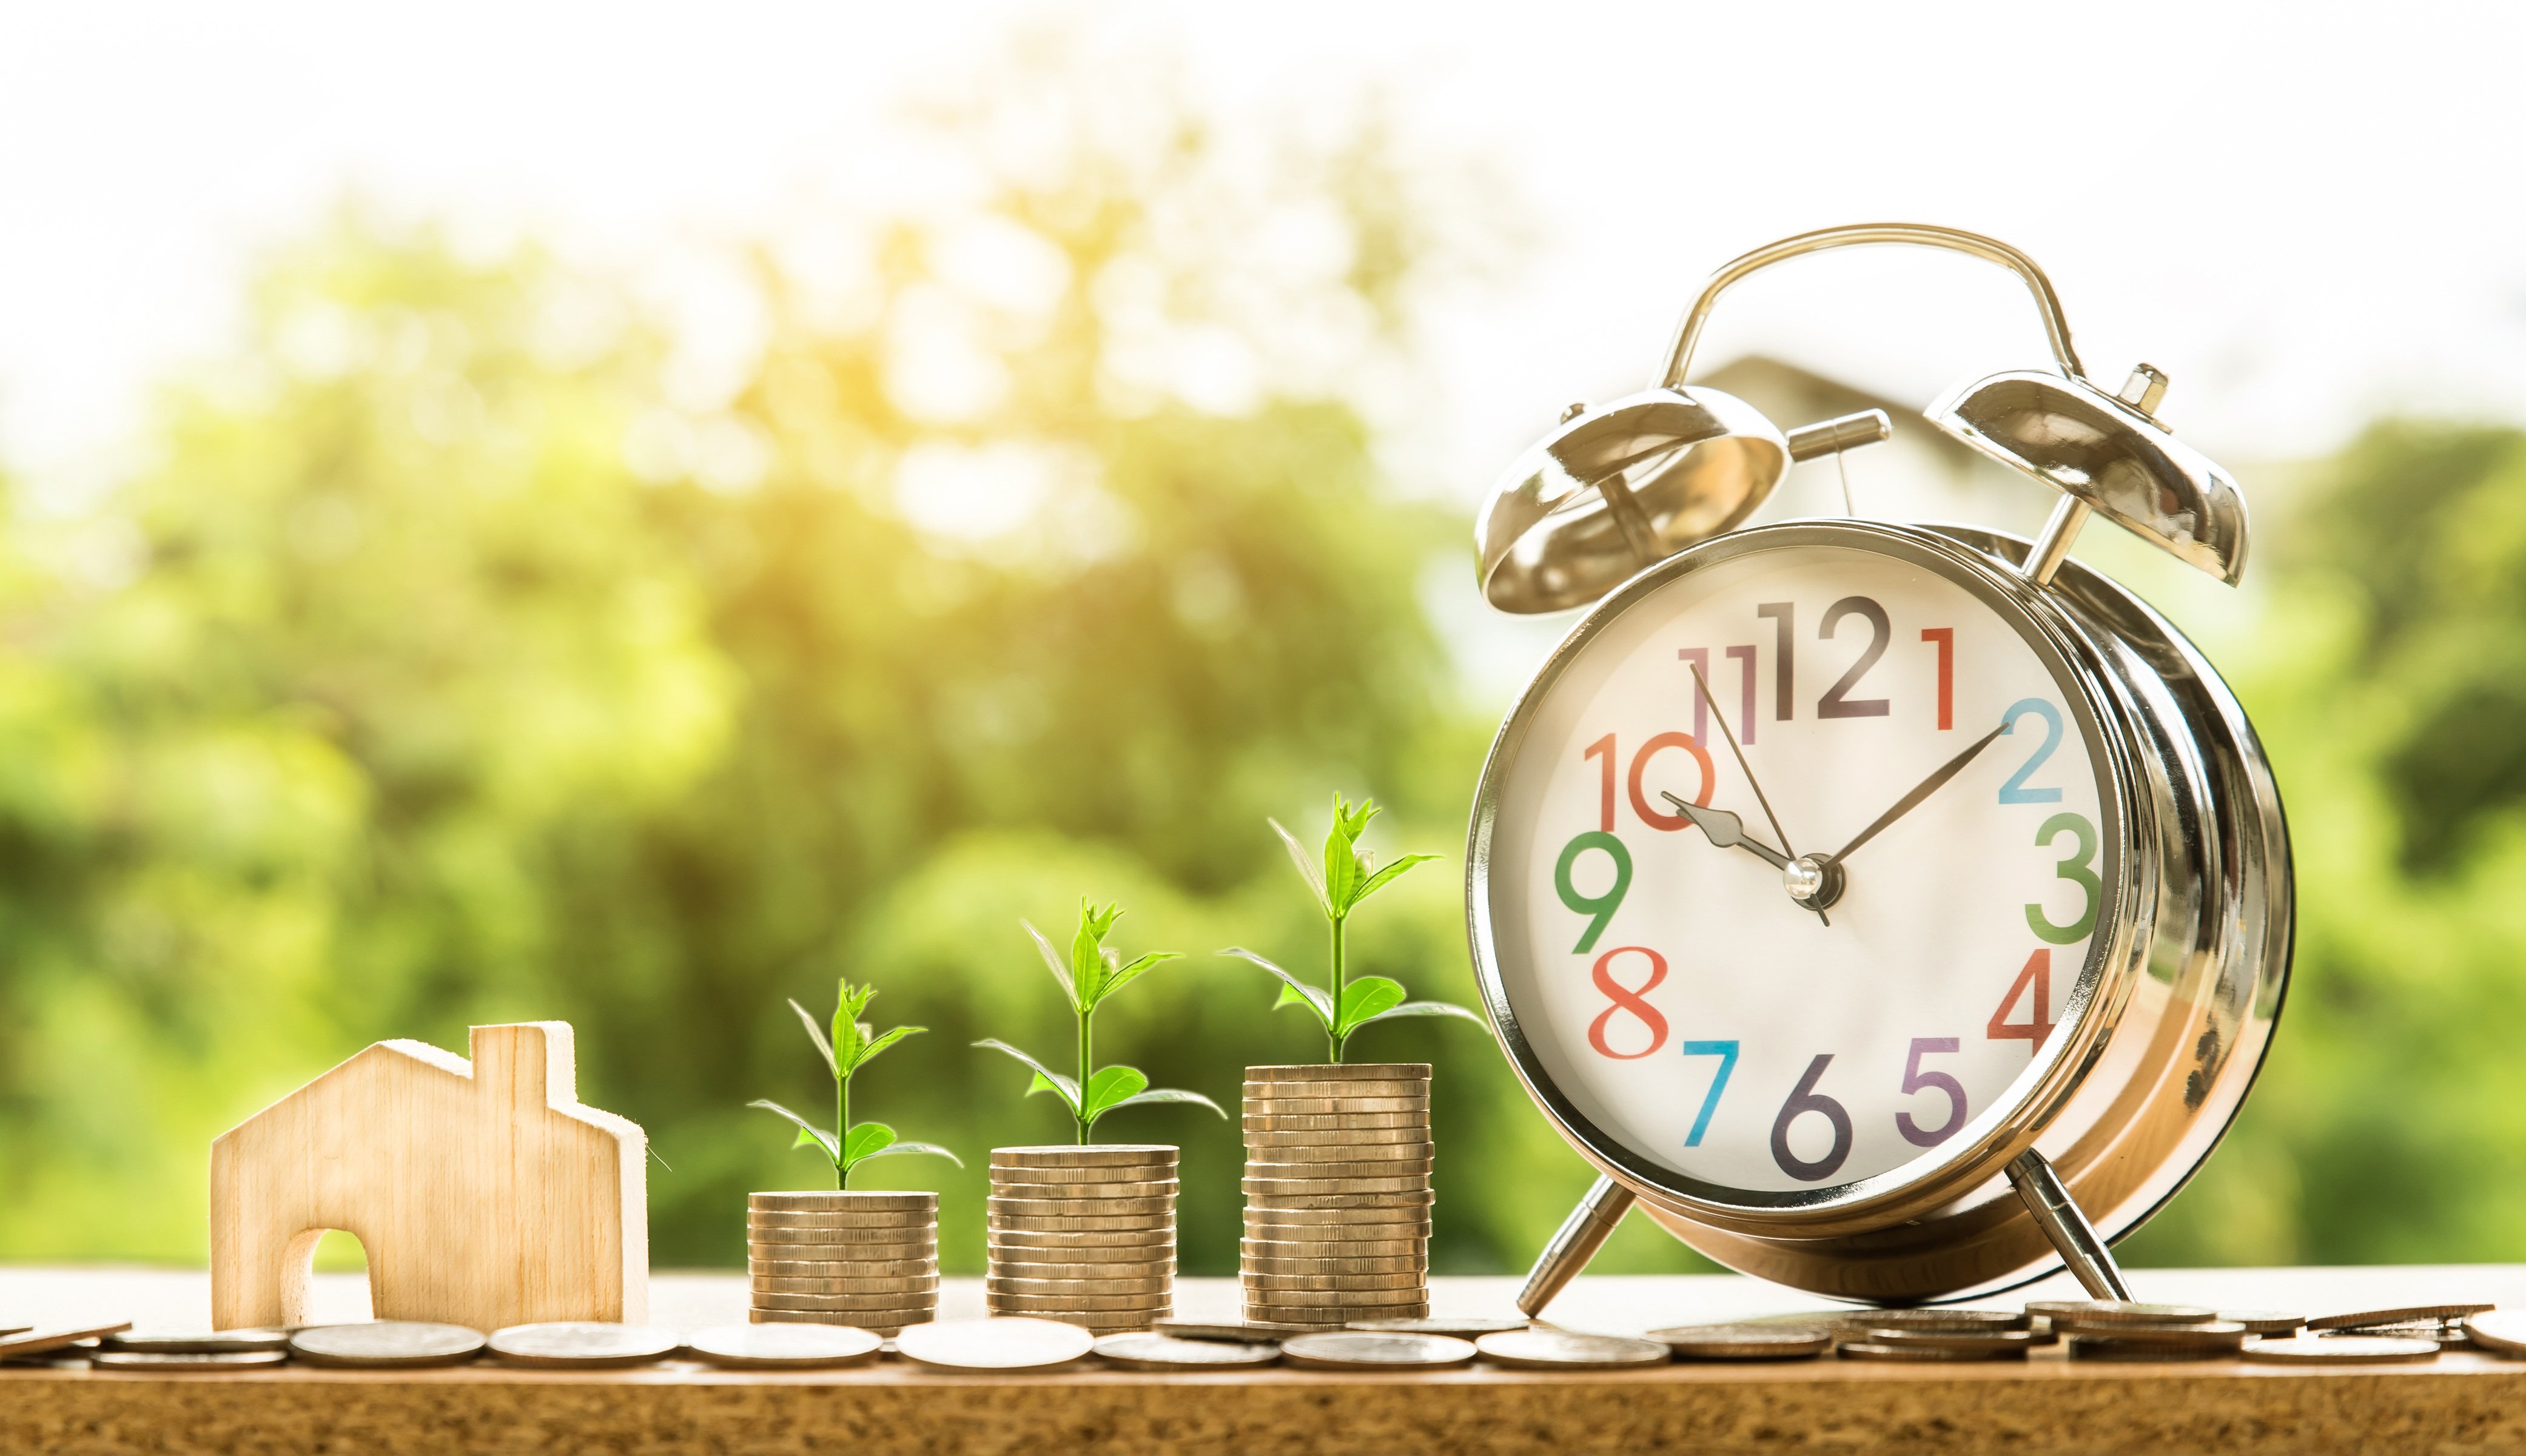 This is a photo of an alarm clock with three small piles of gold coins with new plants growing out of them and a small wooden house.